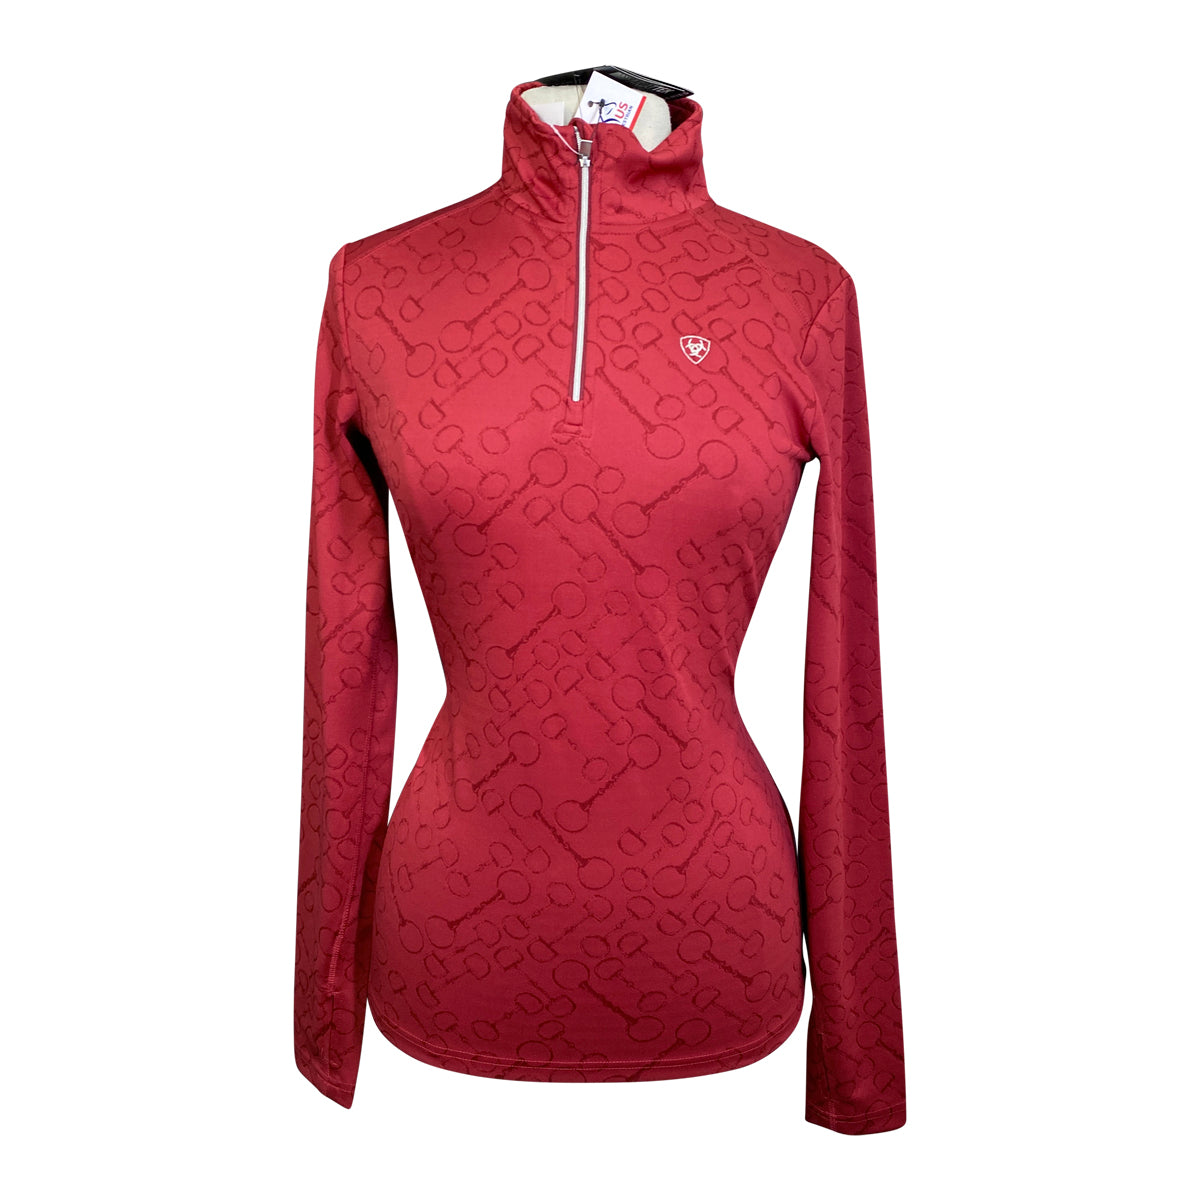 Ariat 'Prophecy' 1/4 Zip Baselayer in Red w/Bits